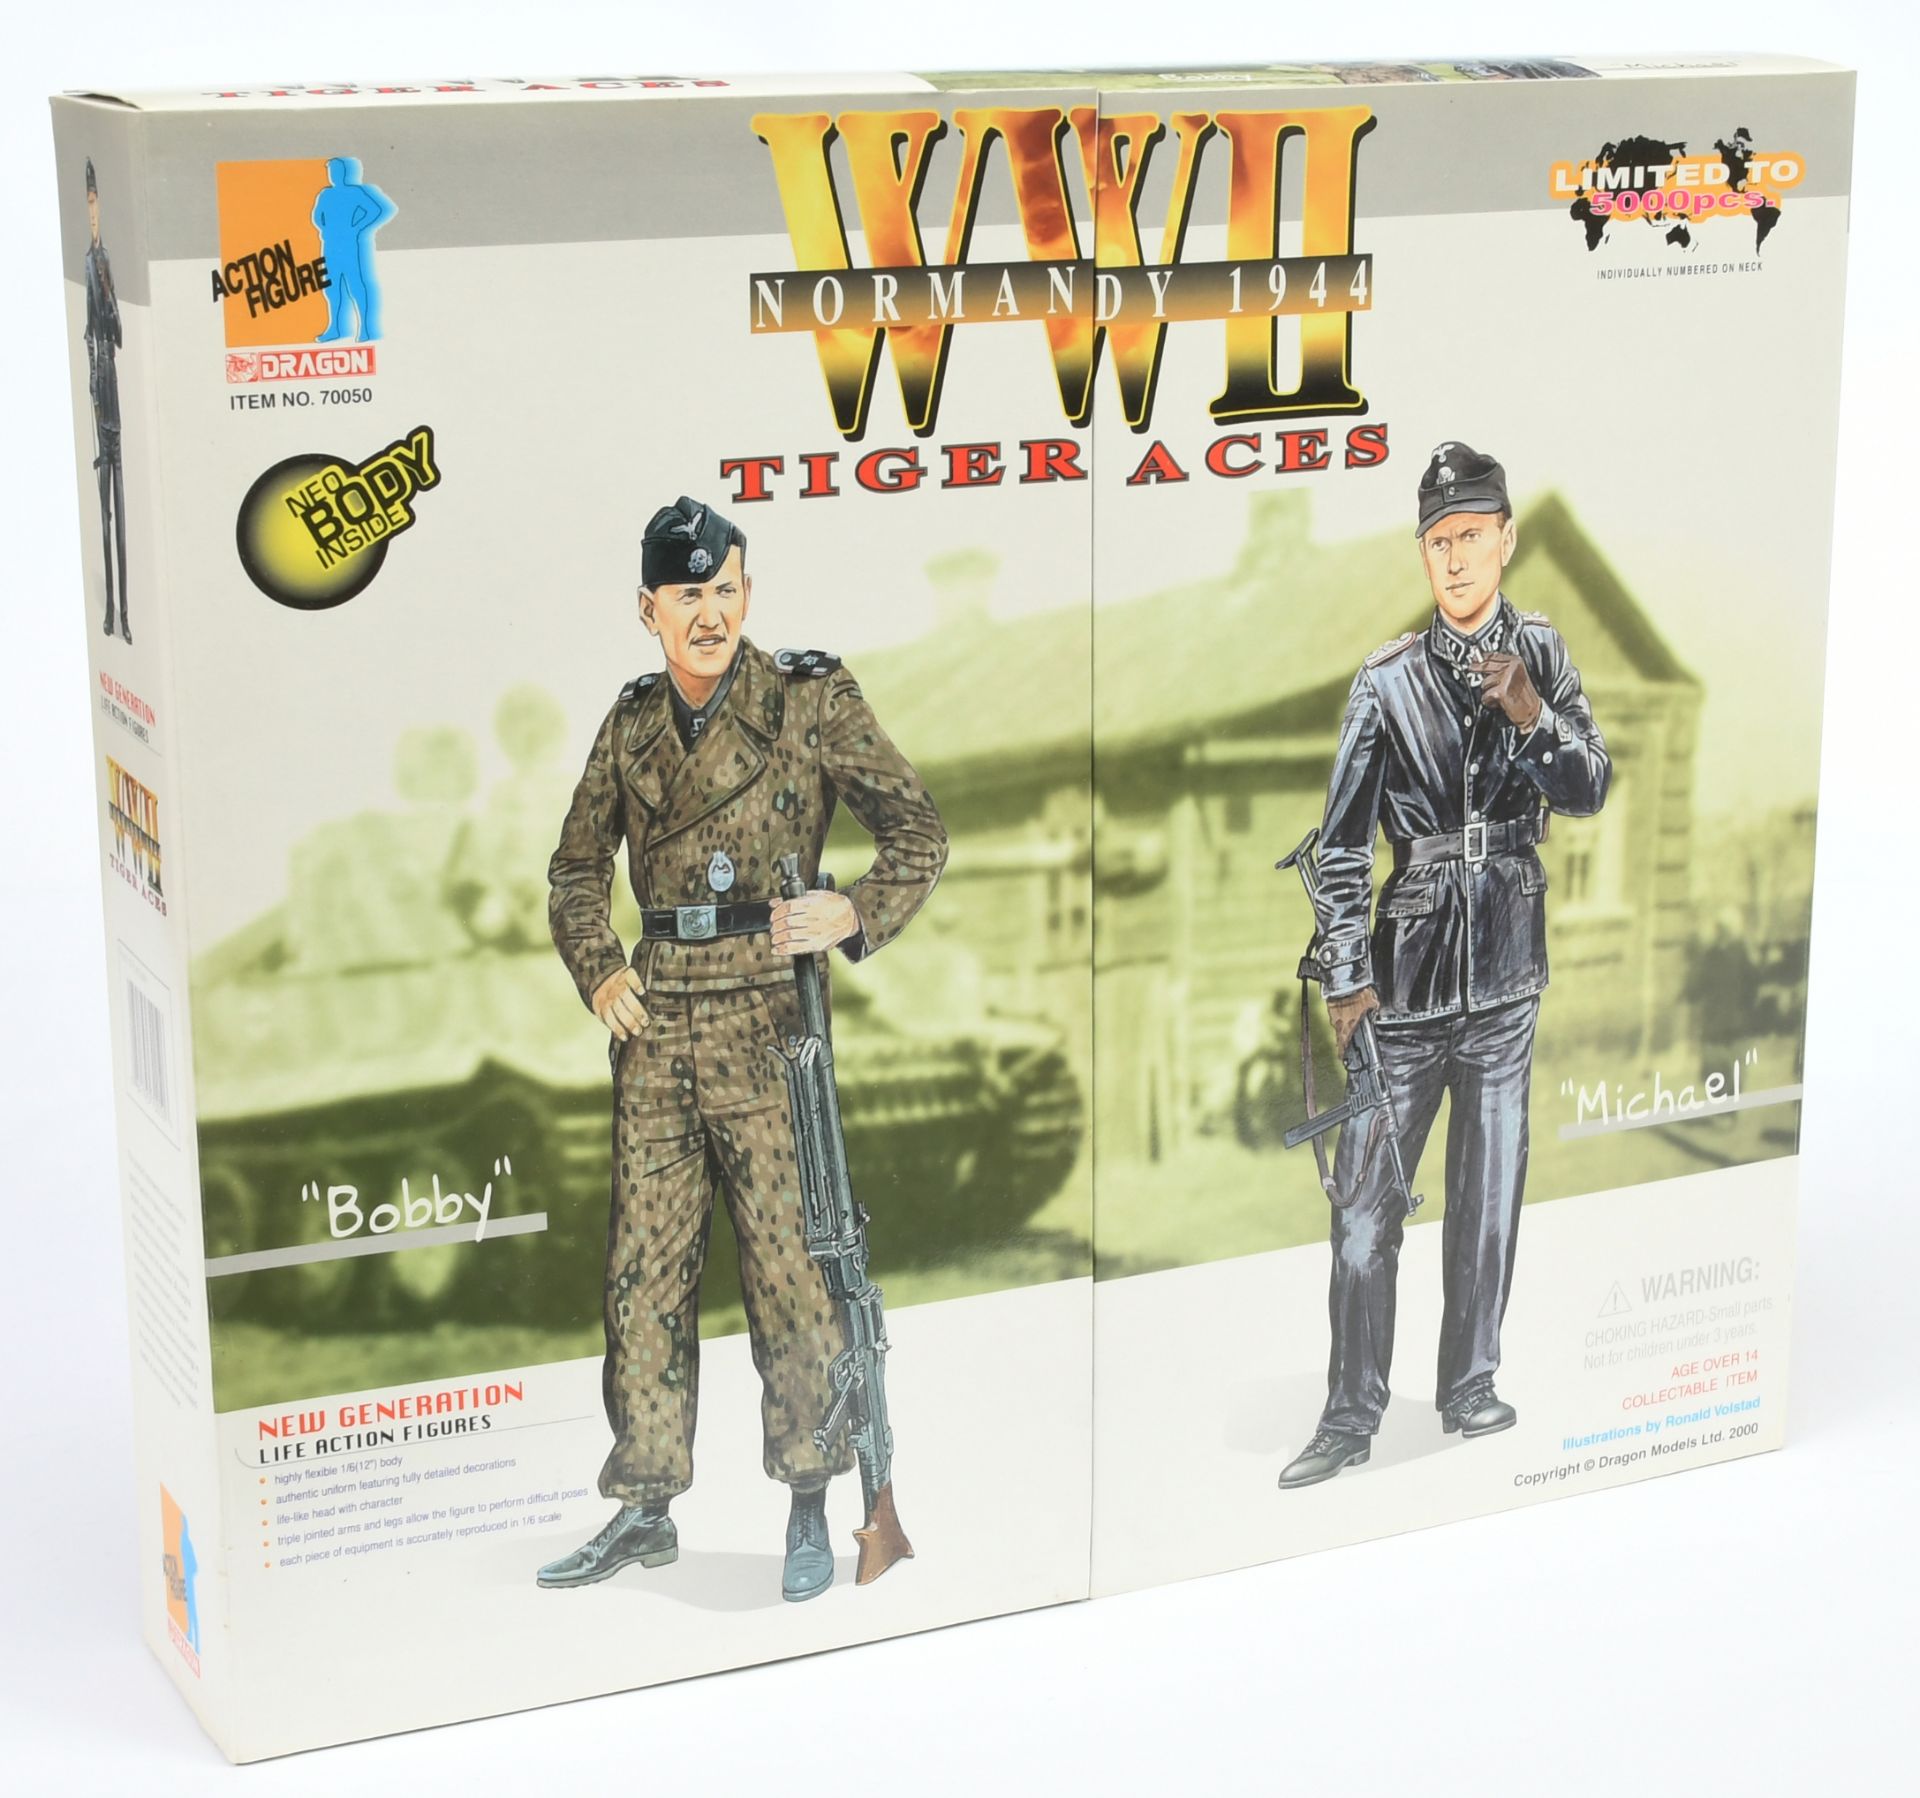 Dragon Action Figure WWII Normandy 1944 Tiger Aces "Bobby" & "Michael" 12 Inch Figures